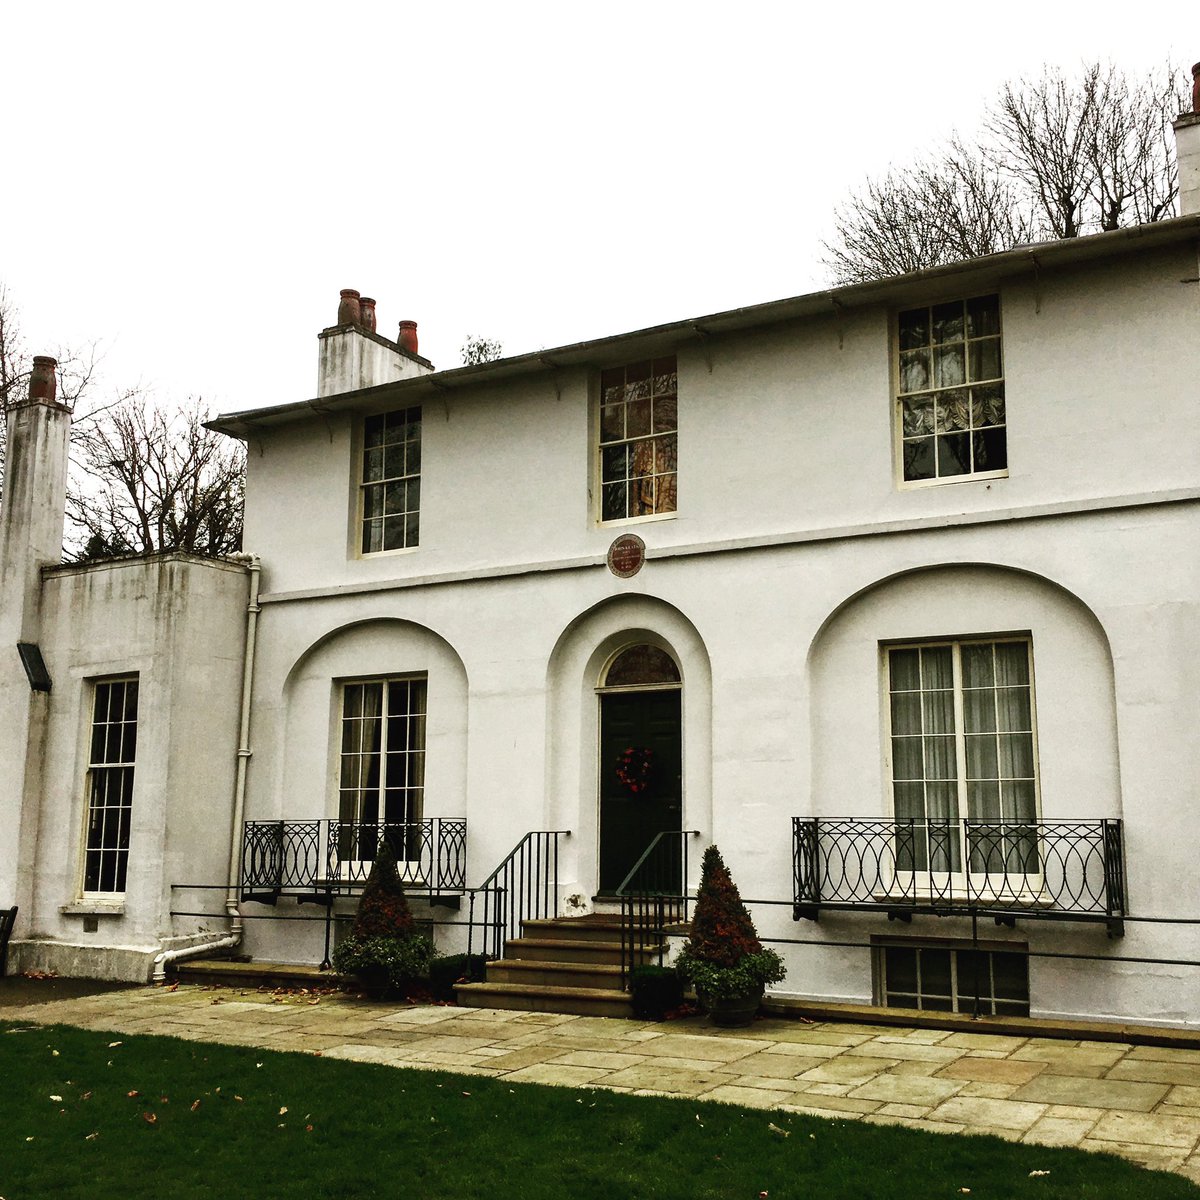  @KeatsHouse another historic house this time in Hampstead. Evocative and atmospheric it tells the story behind Keats’ short life and the inspiration that led to his poetry.  #MuseumsUnlocked